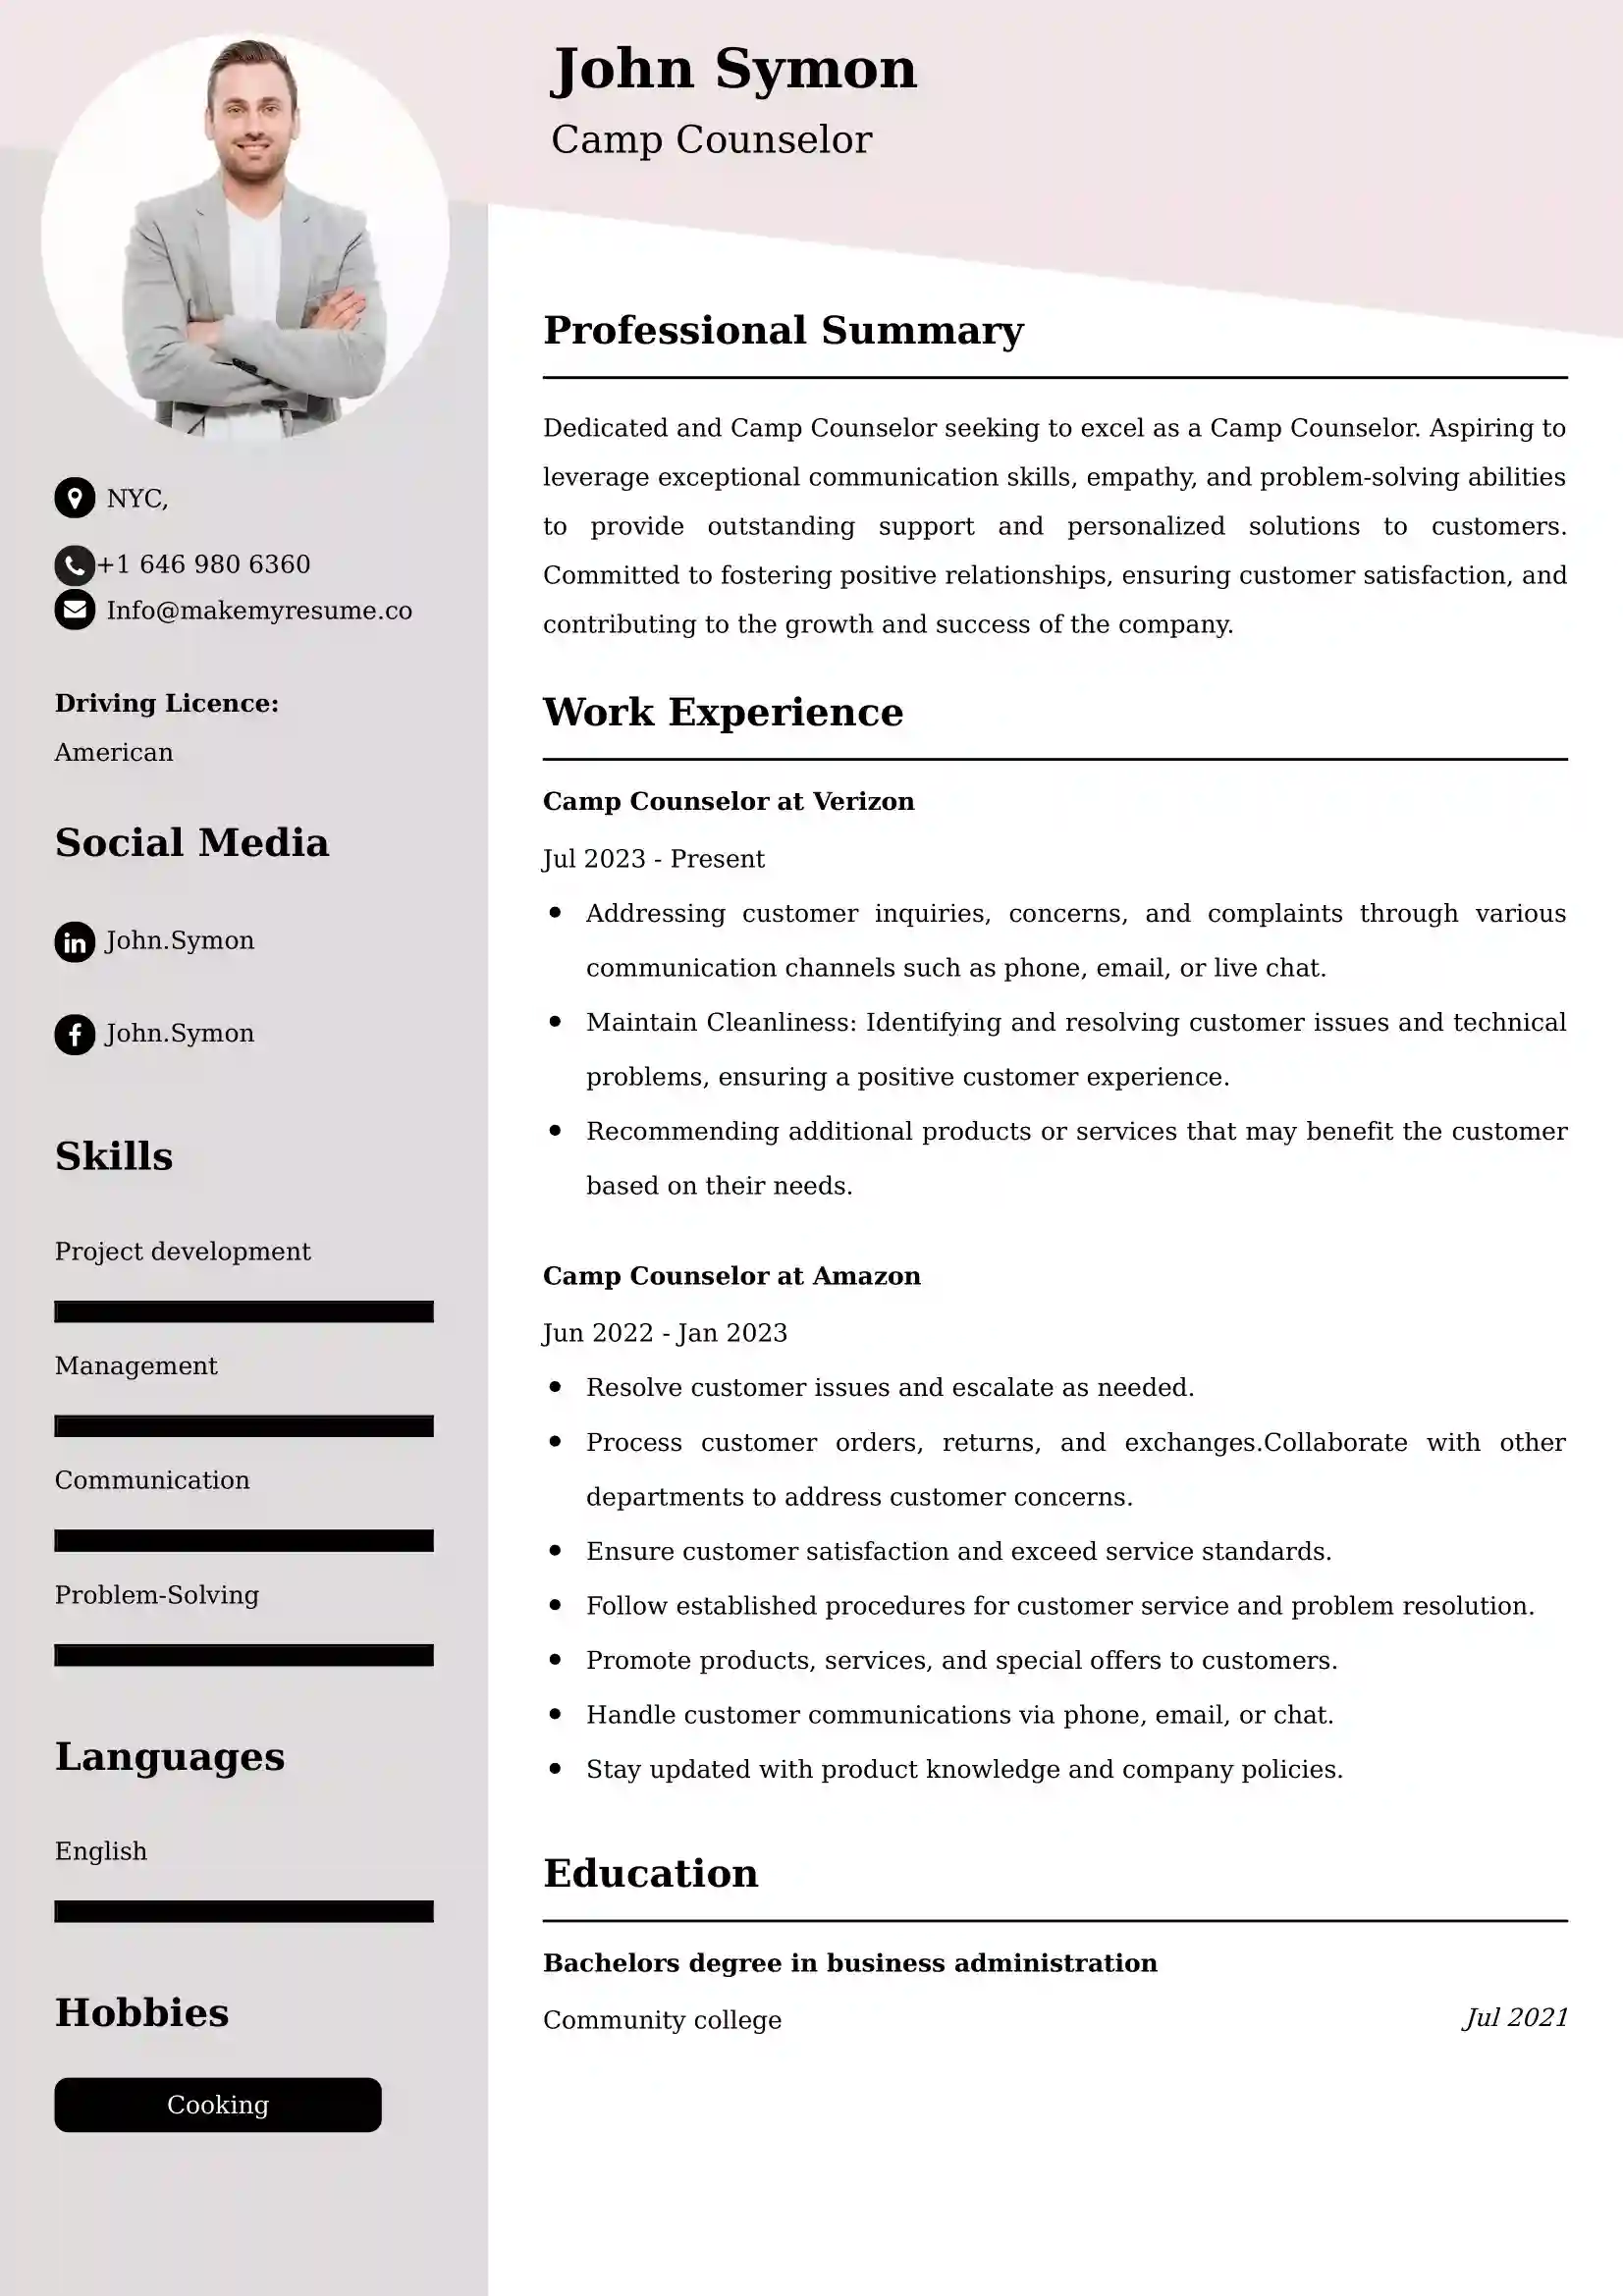 Camp Counselor Resume Examples - UAE Format and Tips.